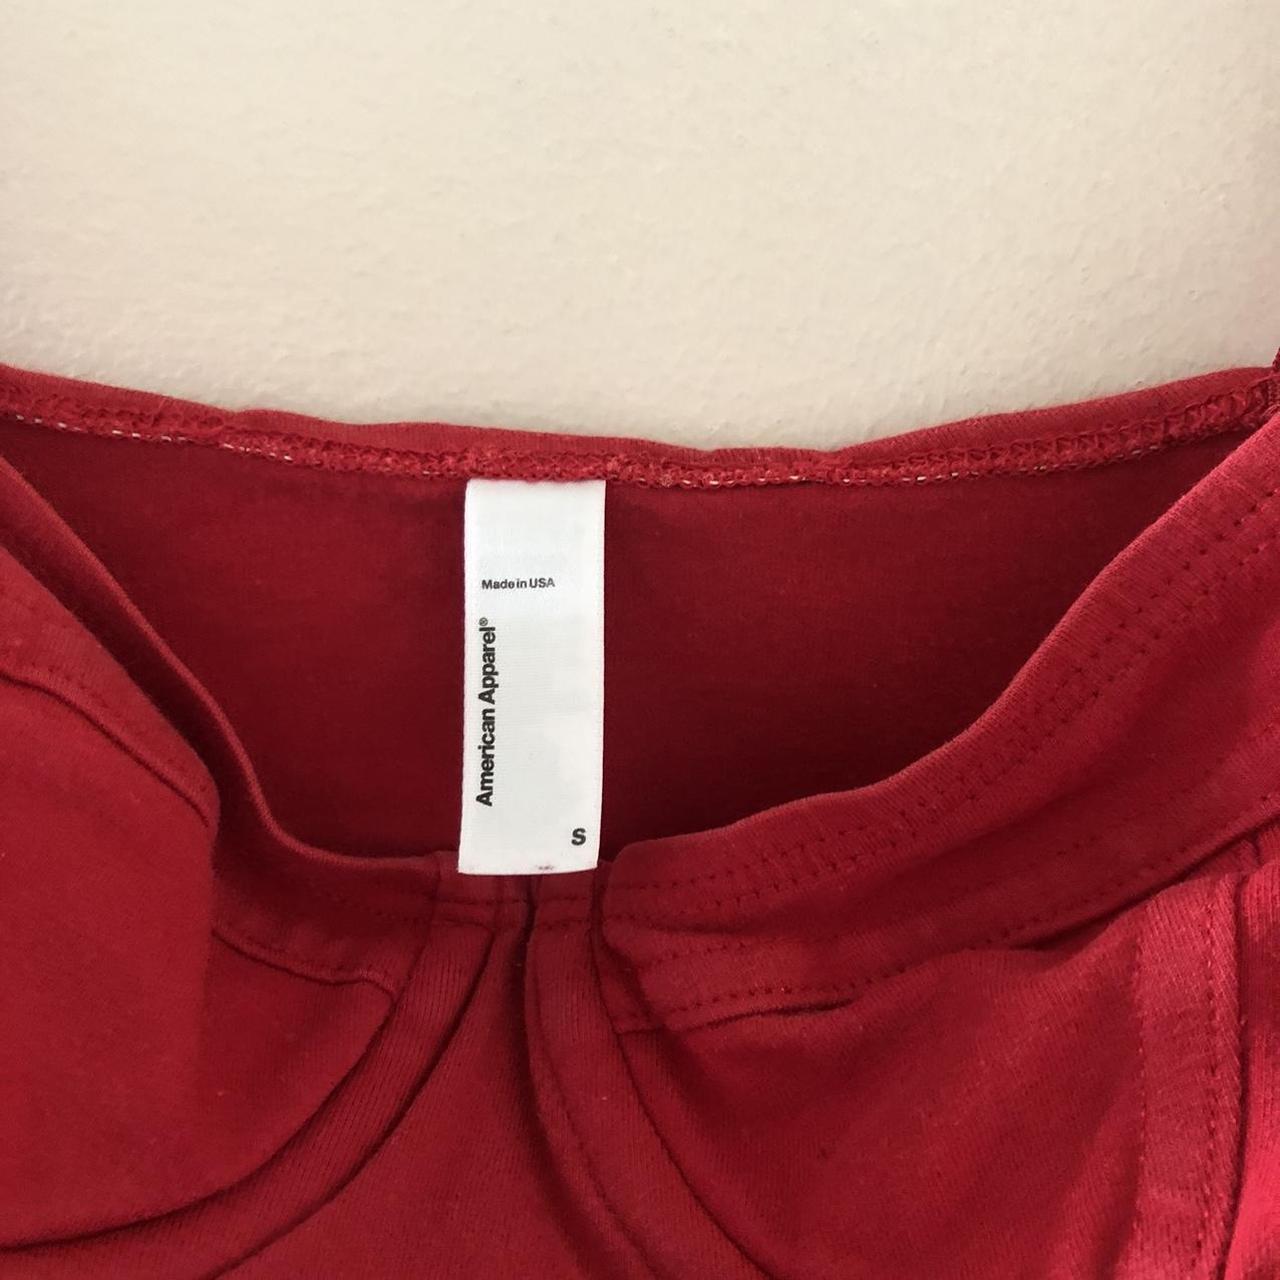 Incredible red bustier American Apparel wired mini... - Depop